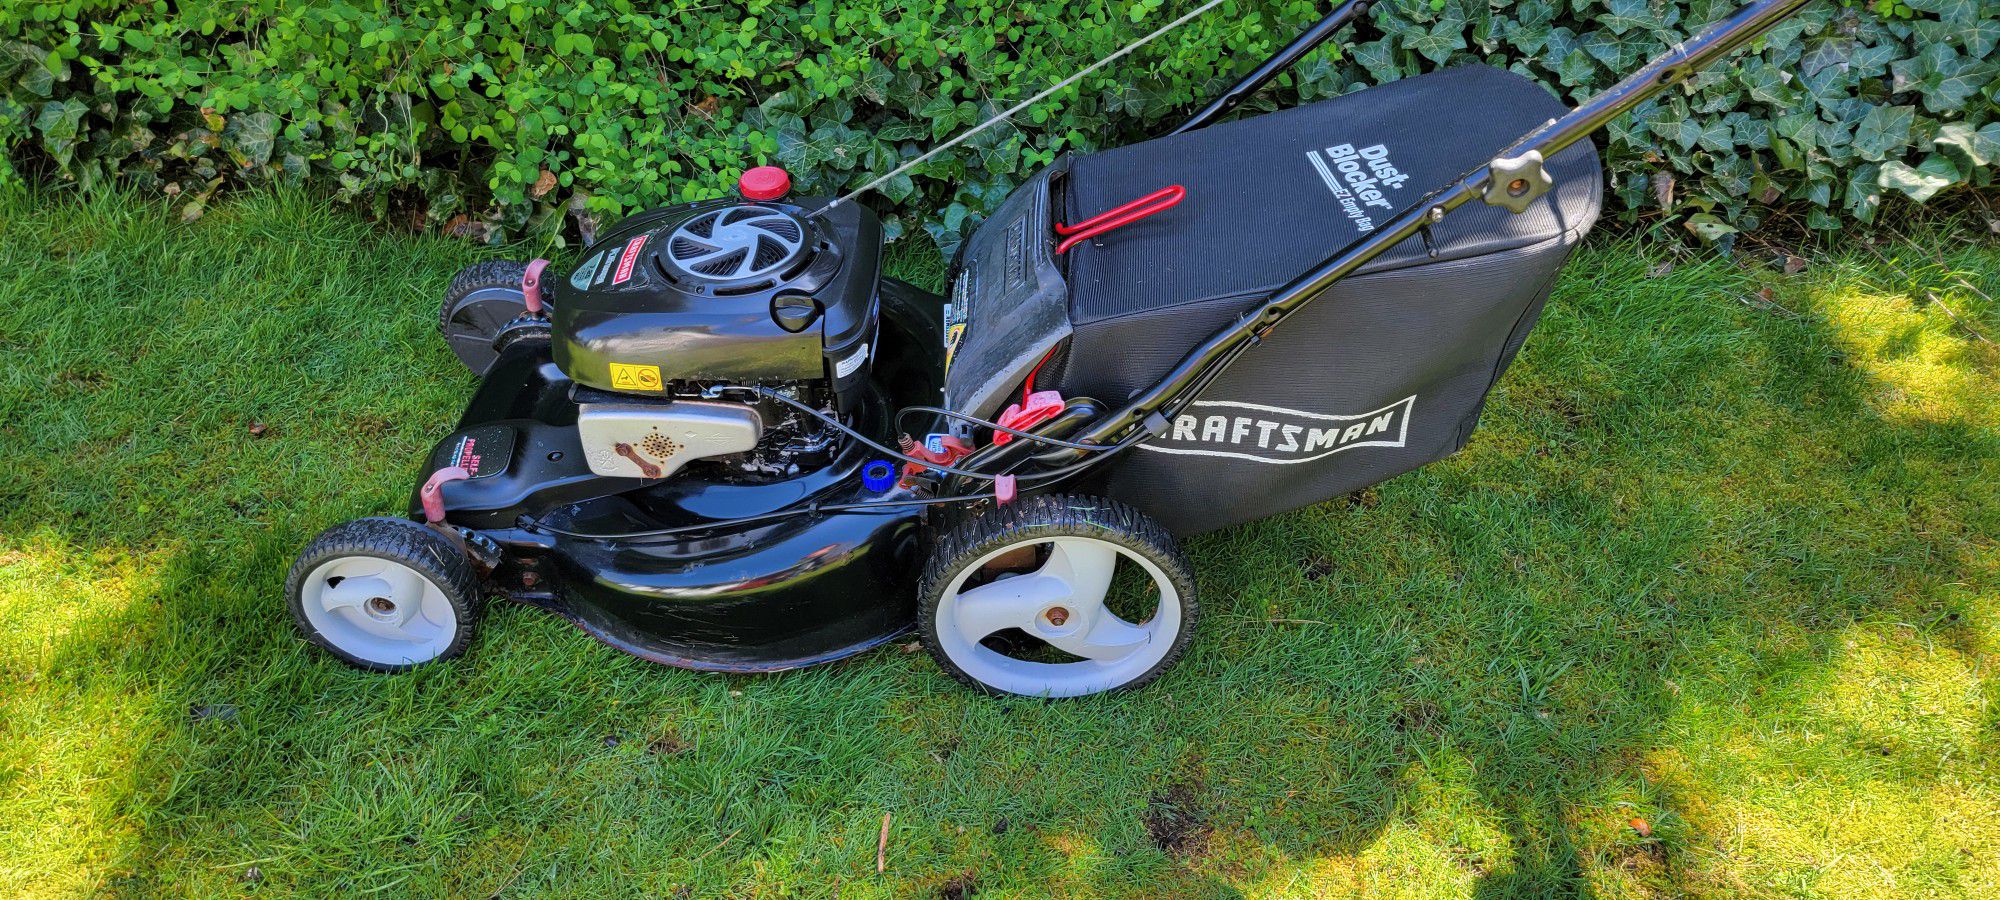 Craftsman Self Propelled Lawn Mower With Bag Runs Great 